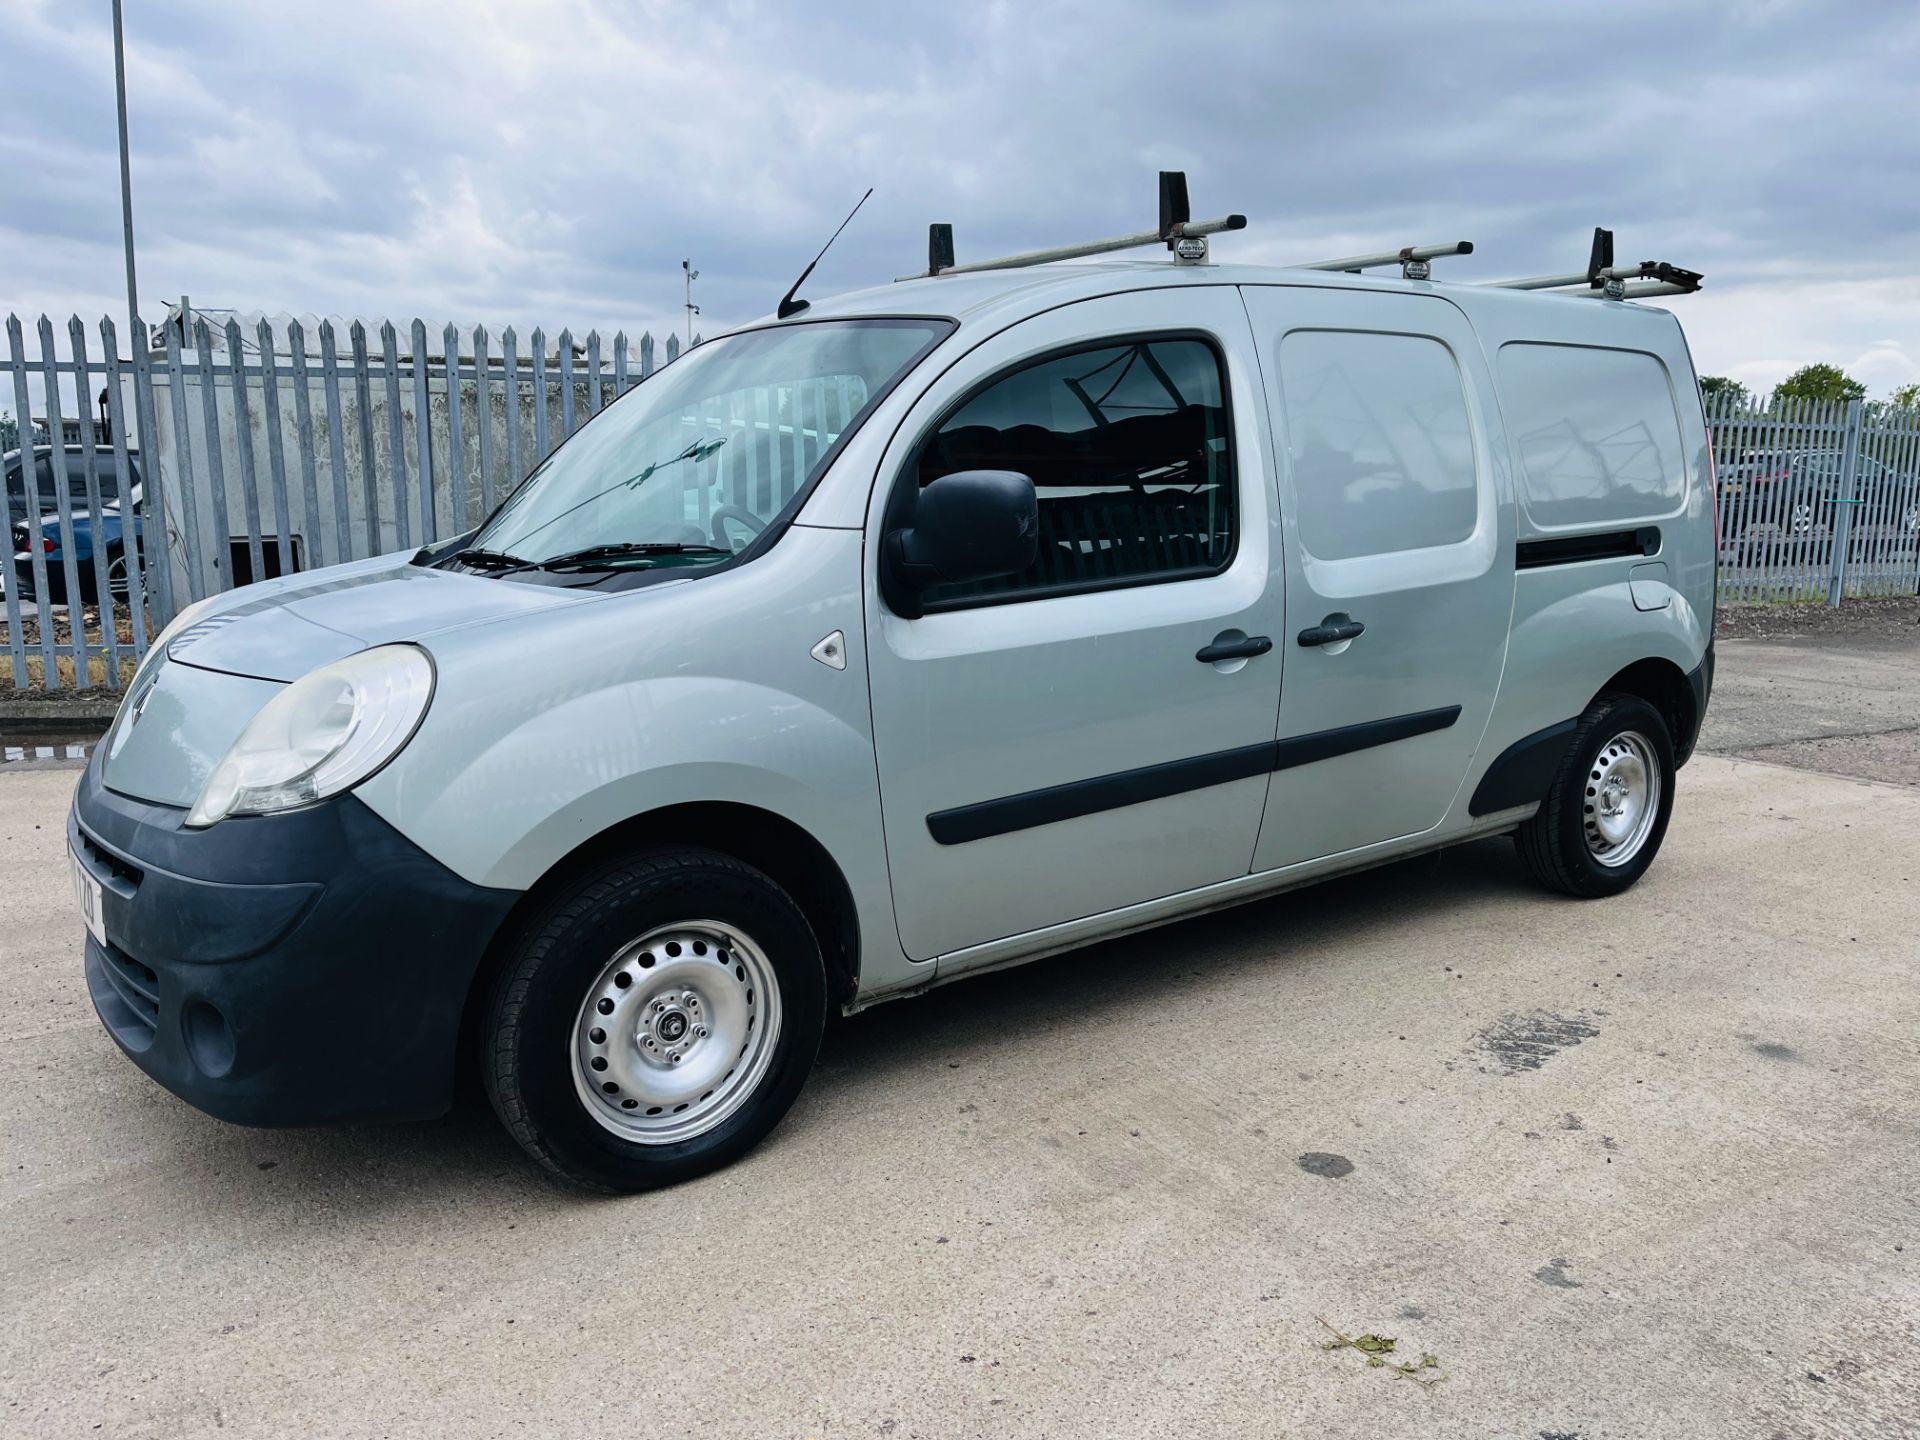 (Reserve Met) Renault Kangoo dci "Maxi Plus" 11reg - Rare and hard to find a Maxi Plus model -No Vat - Image 7 of 18